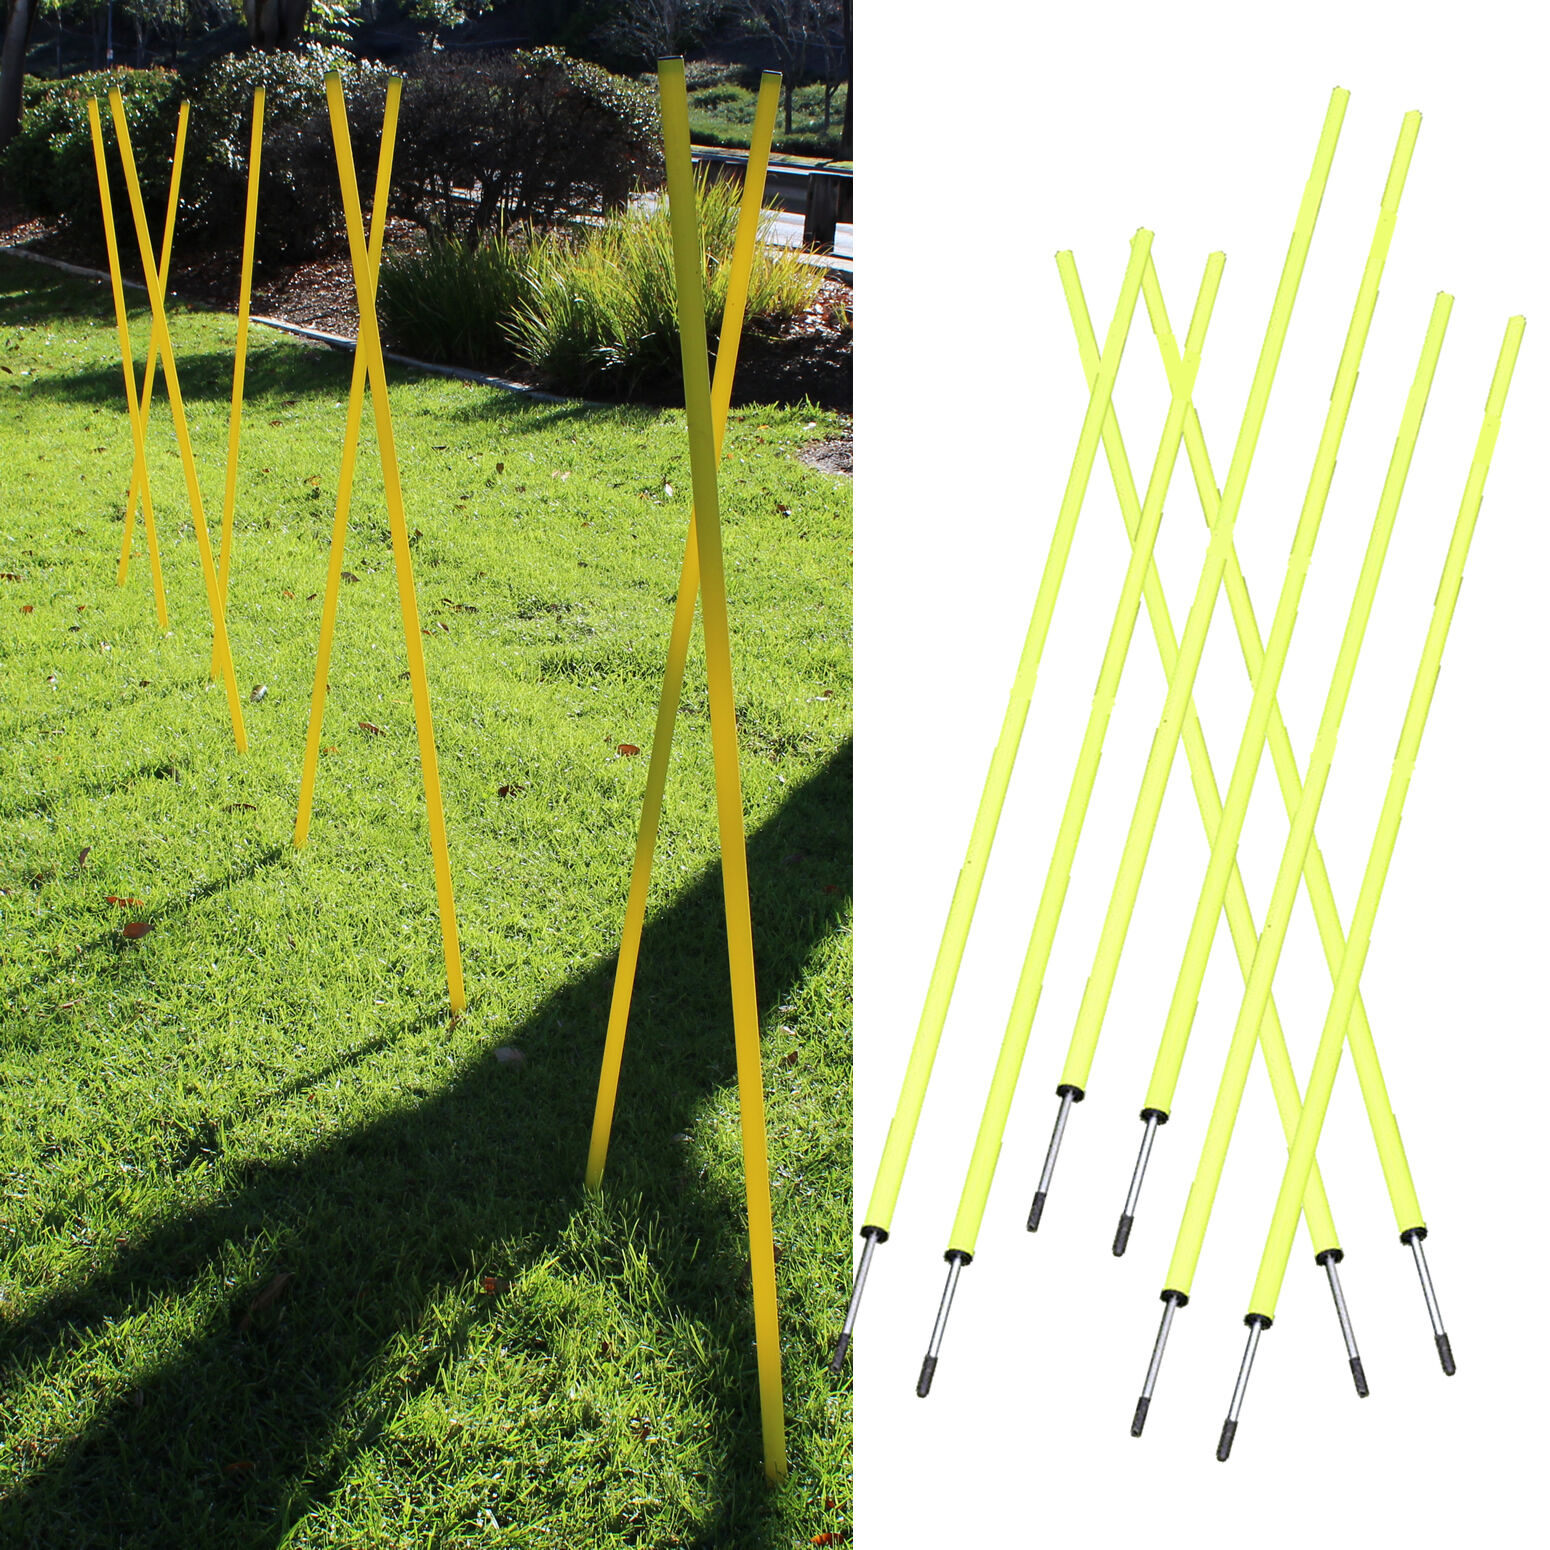 8 Agility Poles Portable Outdoor Training Markers Obstacle football soccer coach